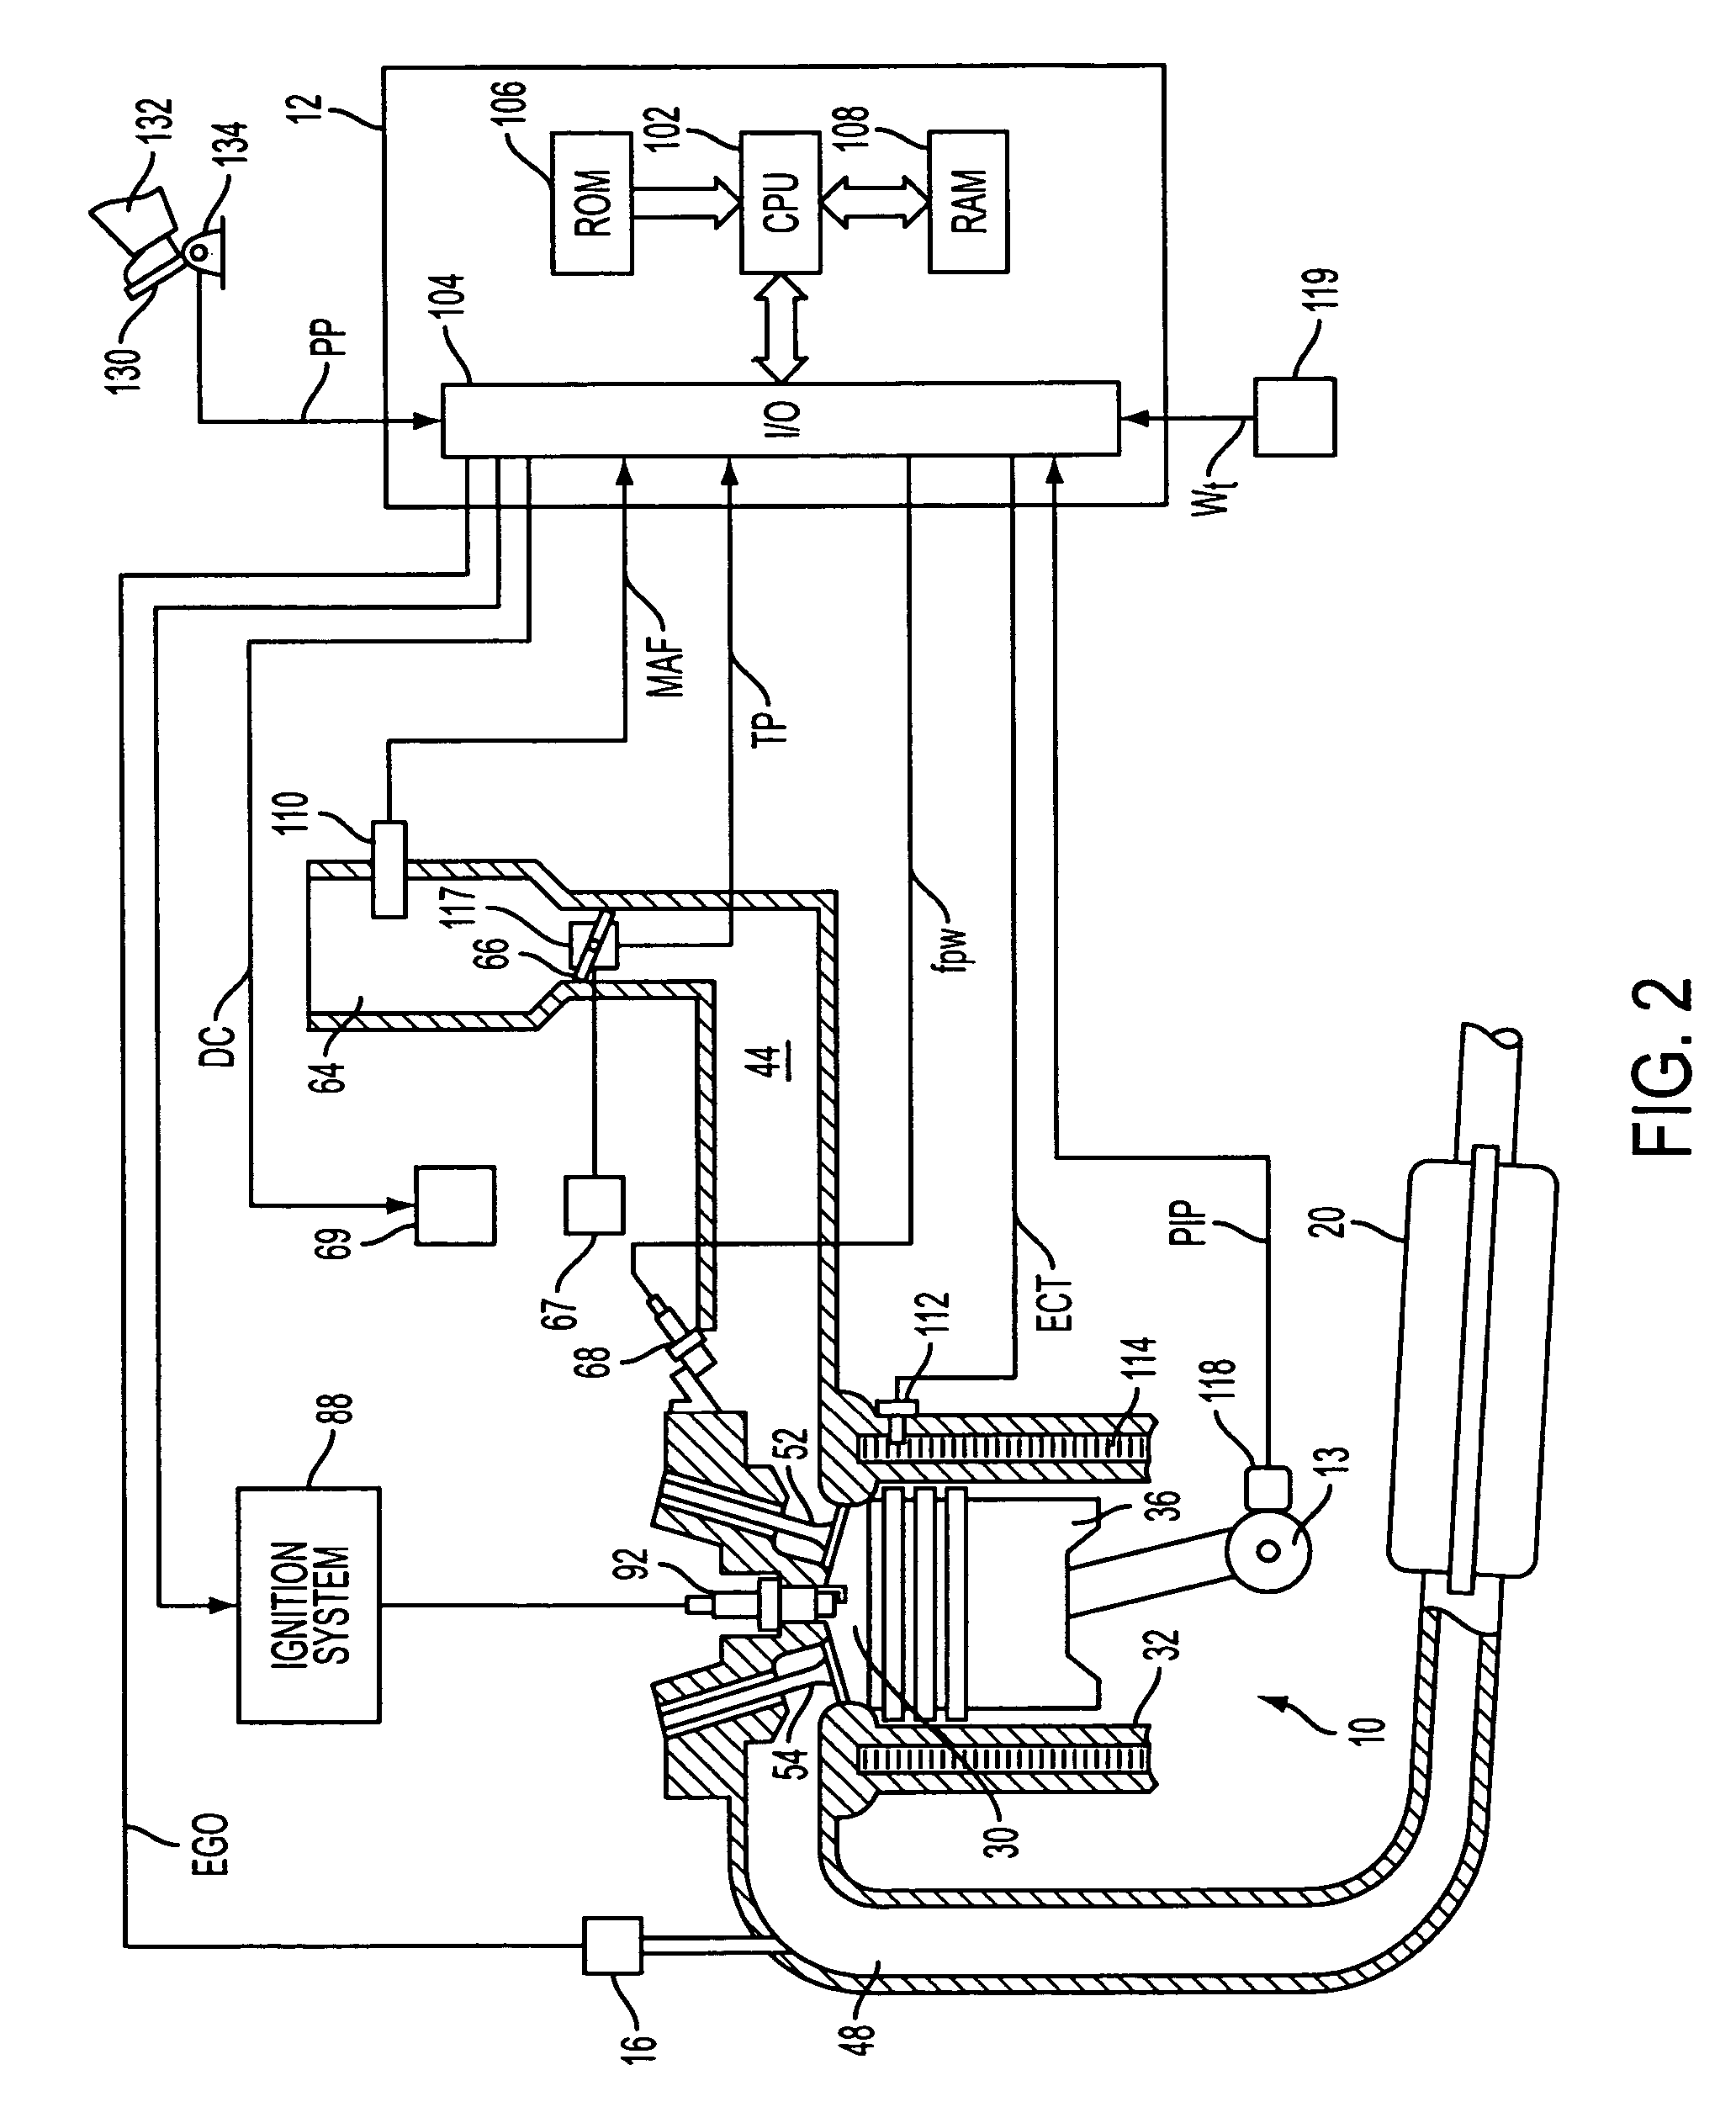 System and method to control fuel injector reactivation during deceleration fuel shut off